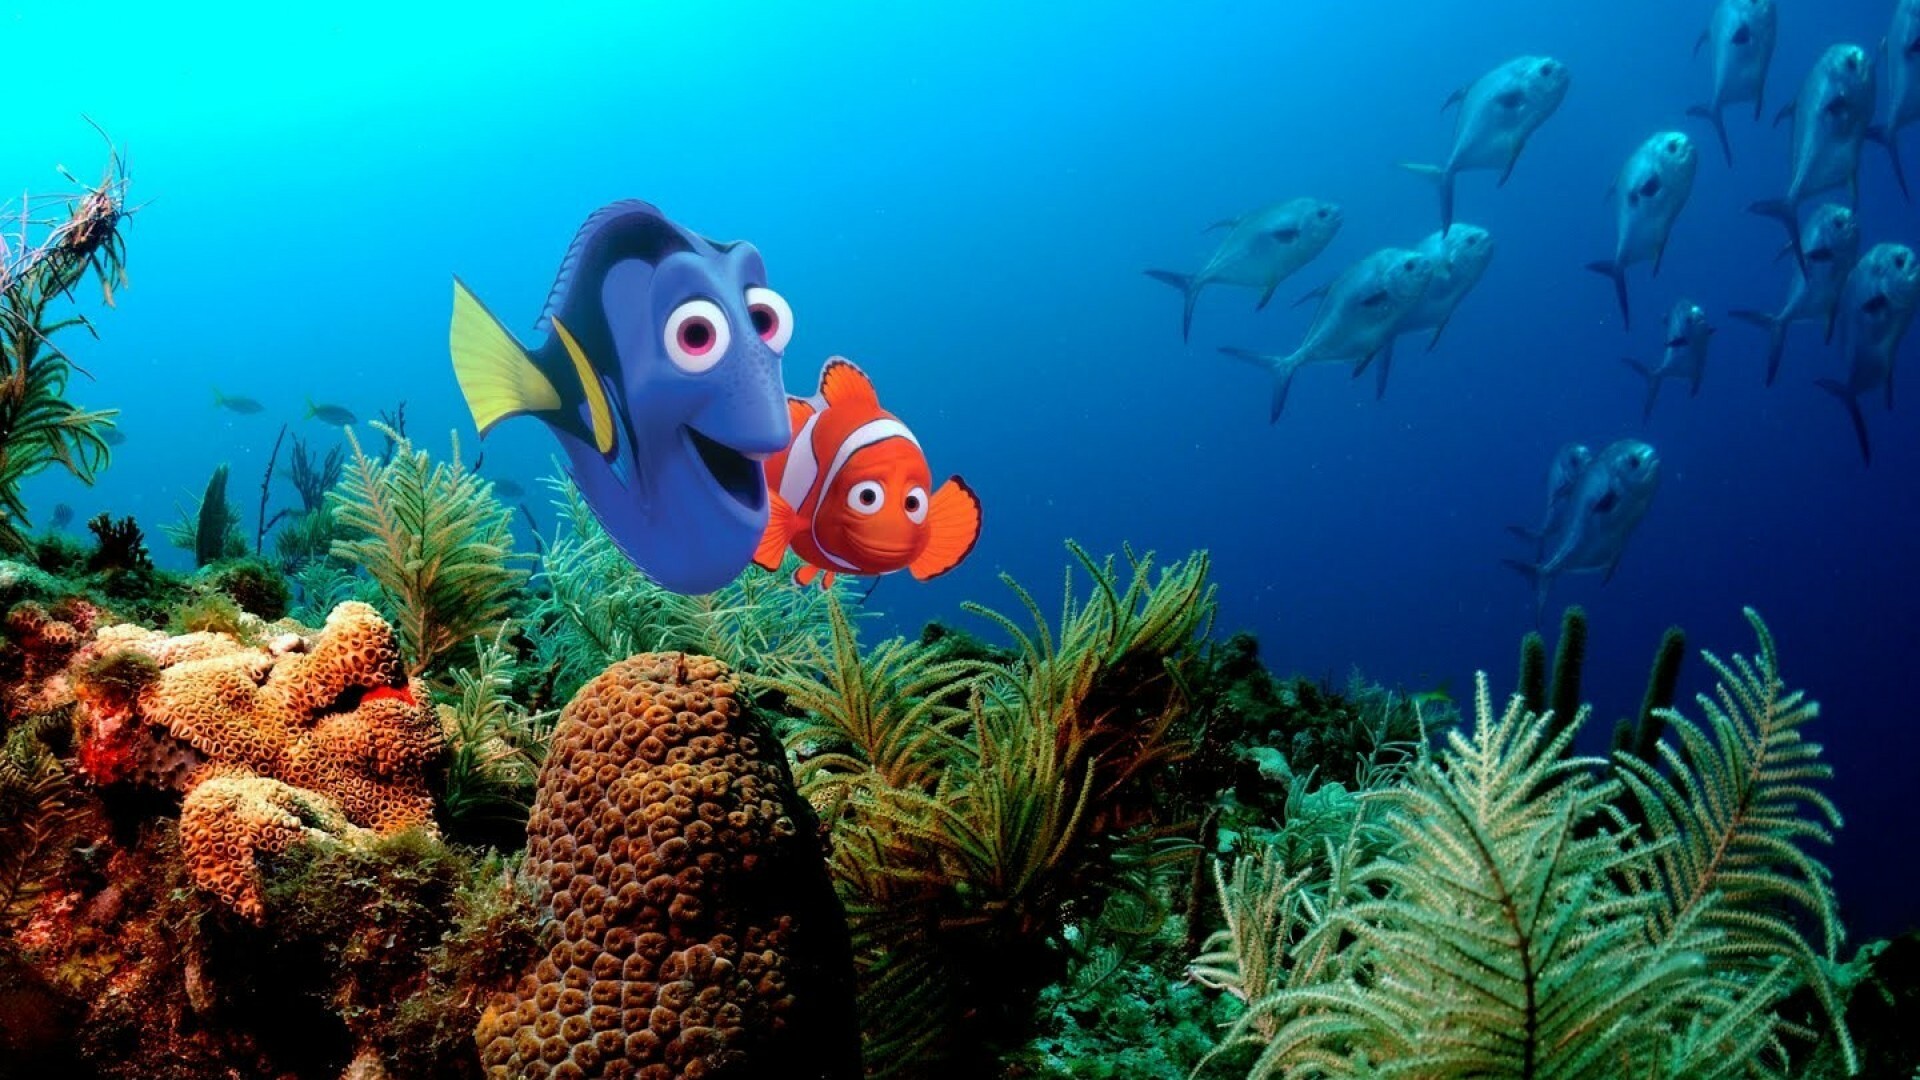 Finding Nemo: A tale which follows the comedic and eventful journeys of two fish, Marine creatures. 1920x1080 Full HD Wallpaper.